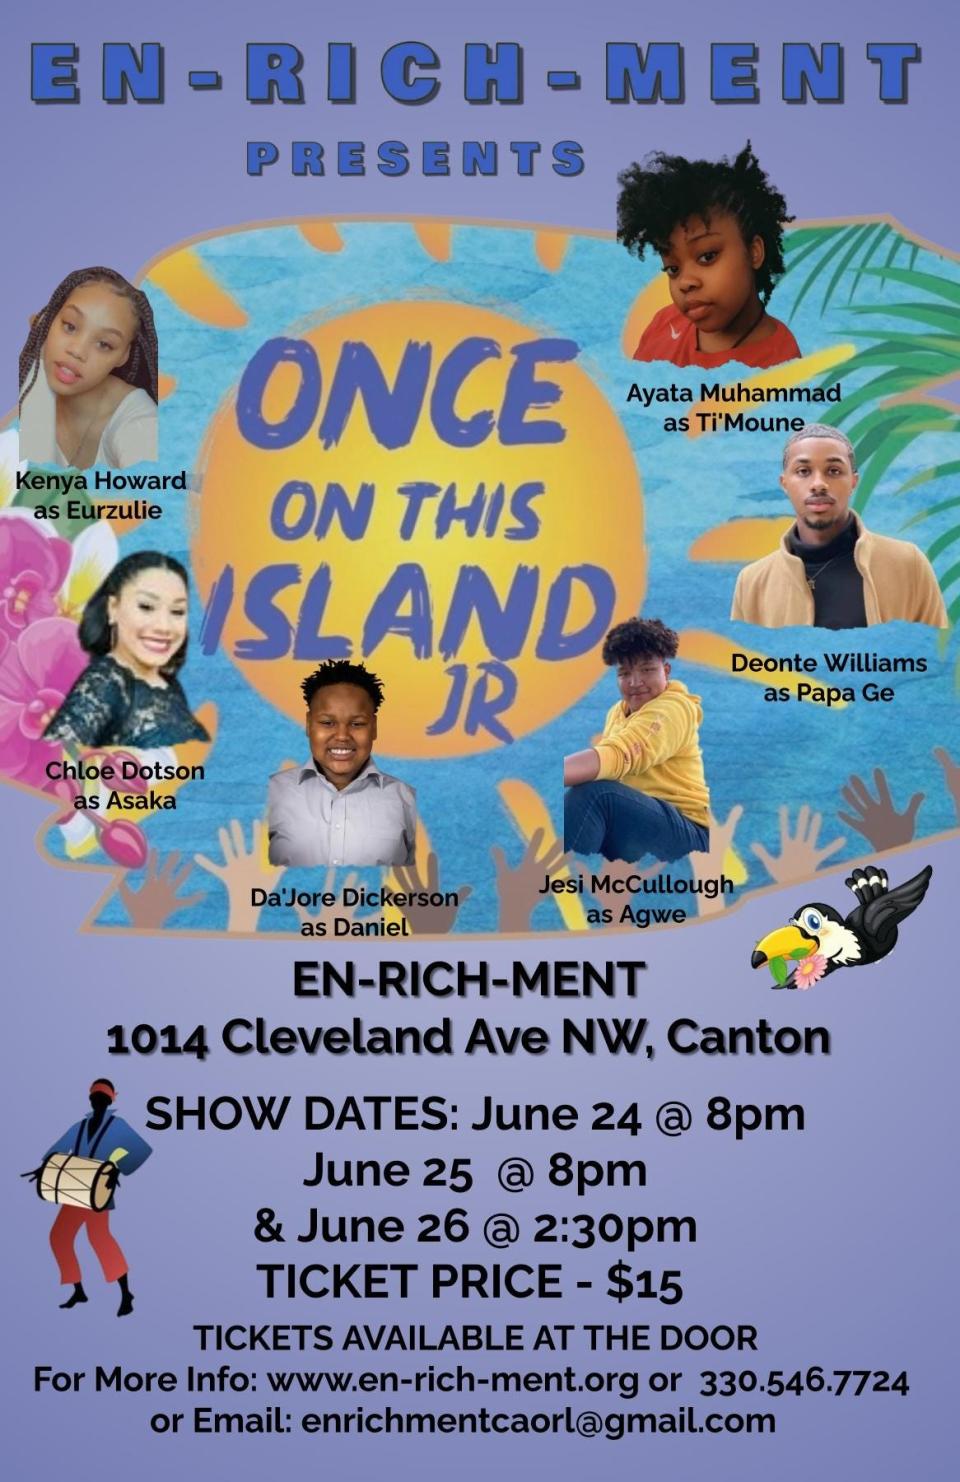 "Once on this Island Jr." will be presented this weekend at the EN-RICH-MENT Arts Academy, 1014 Cleveland Ave. NW. Tickets are $15 and available at the door.